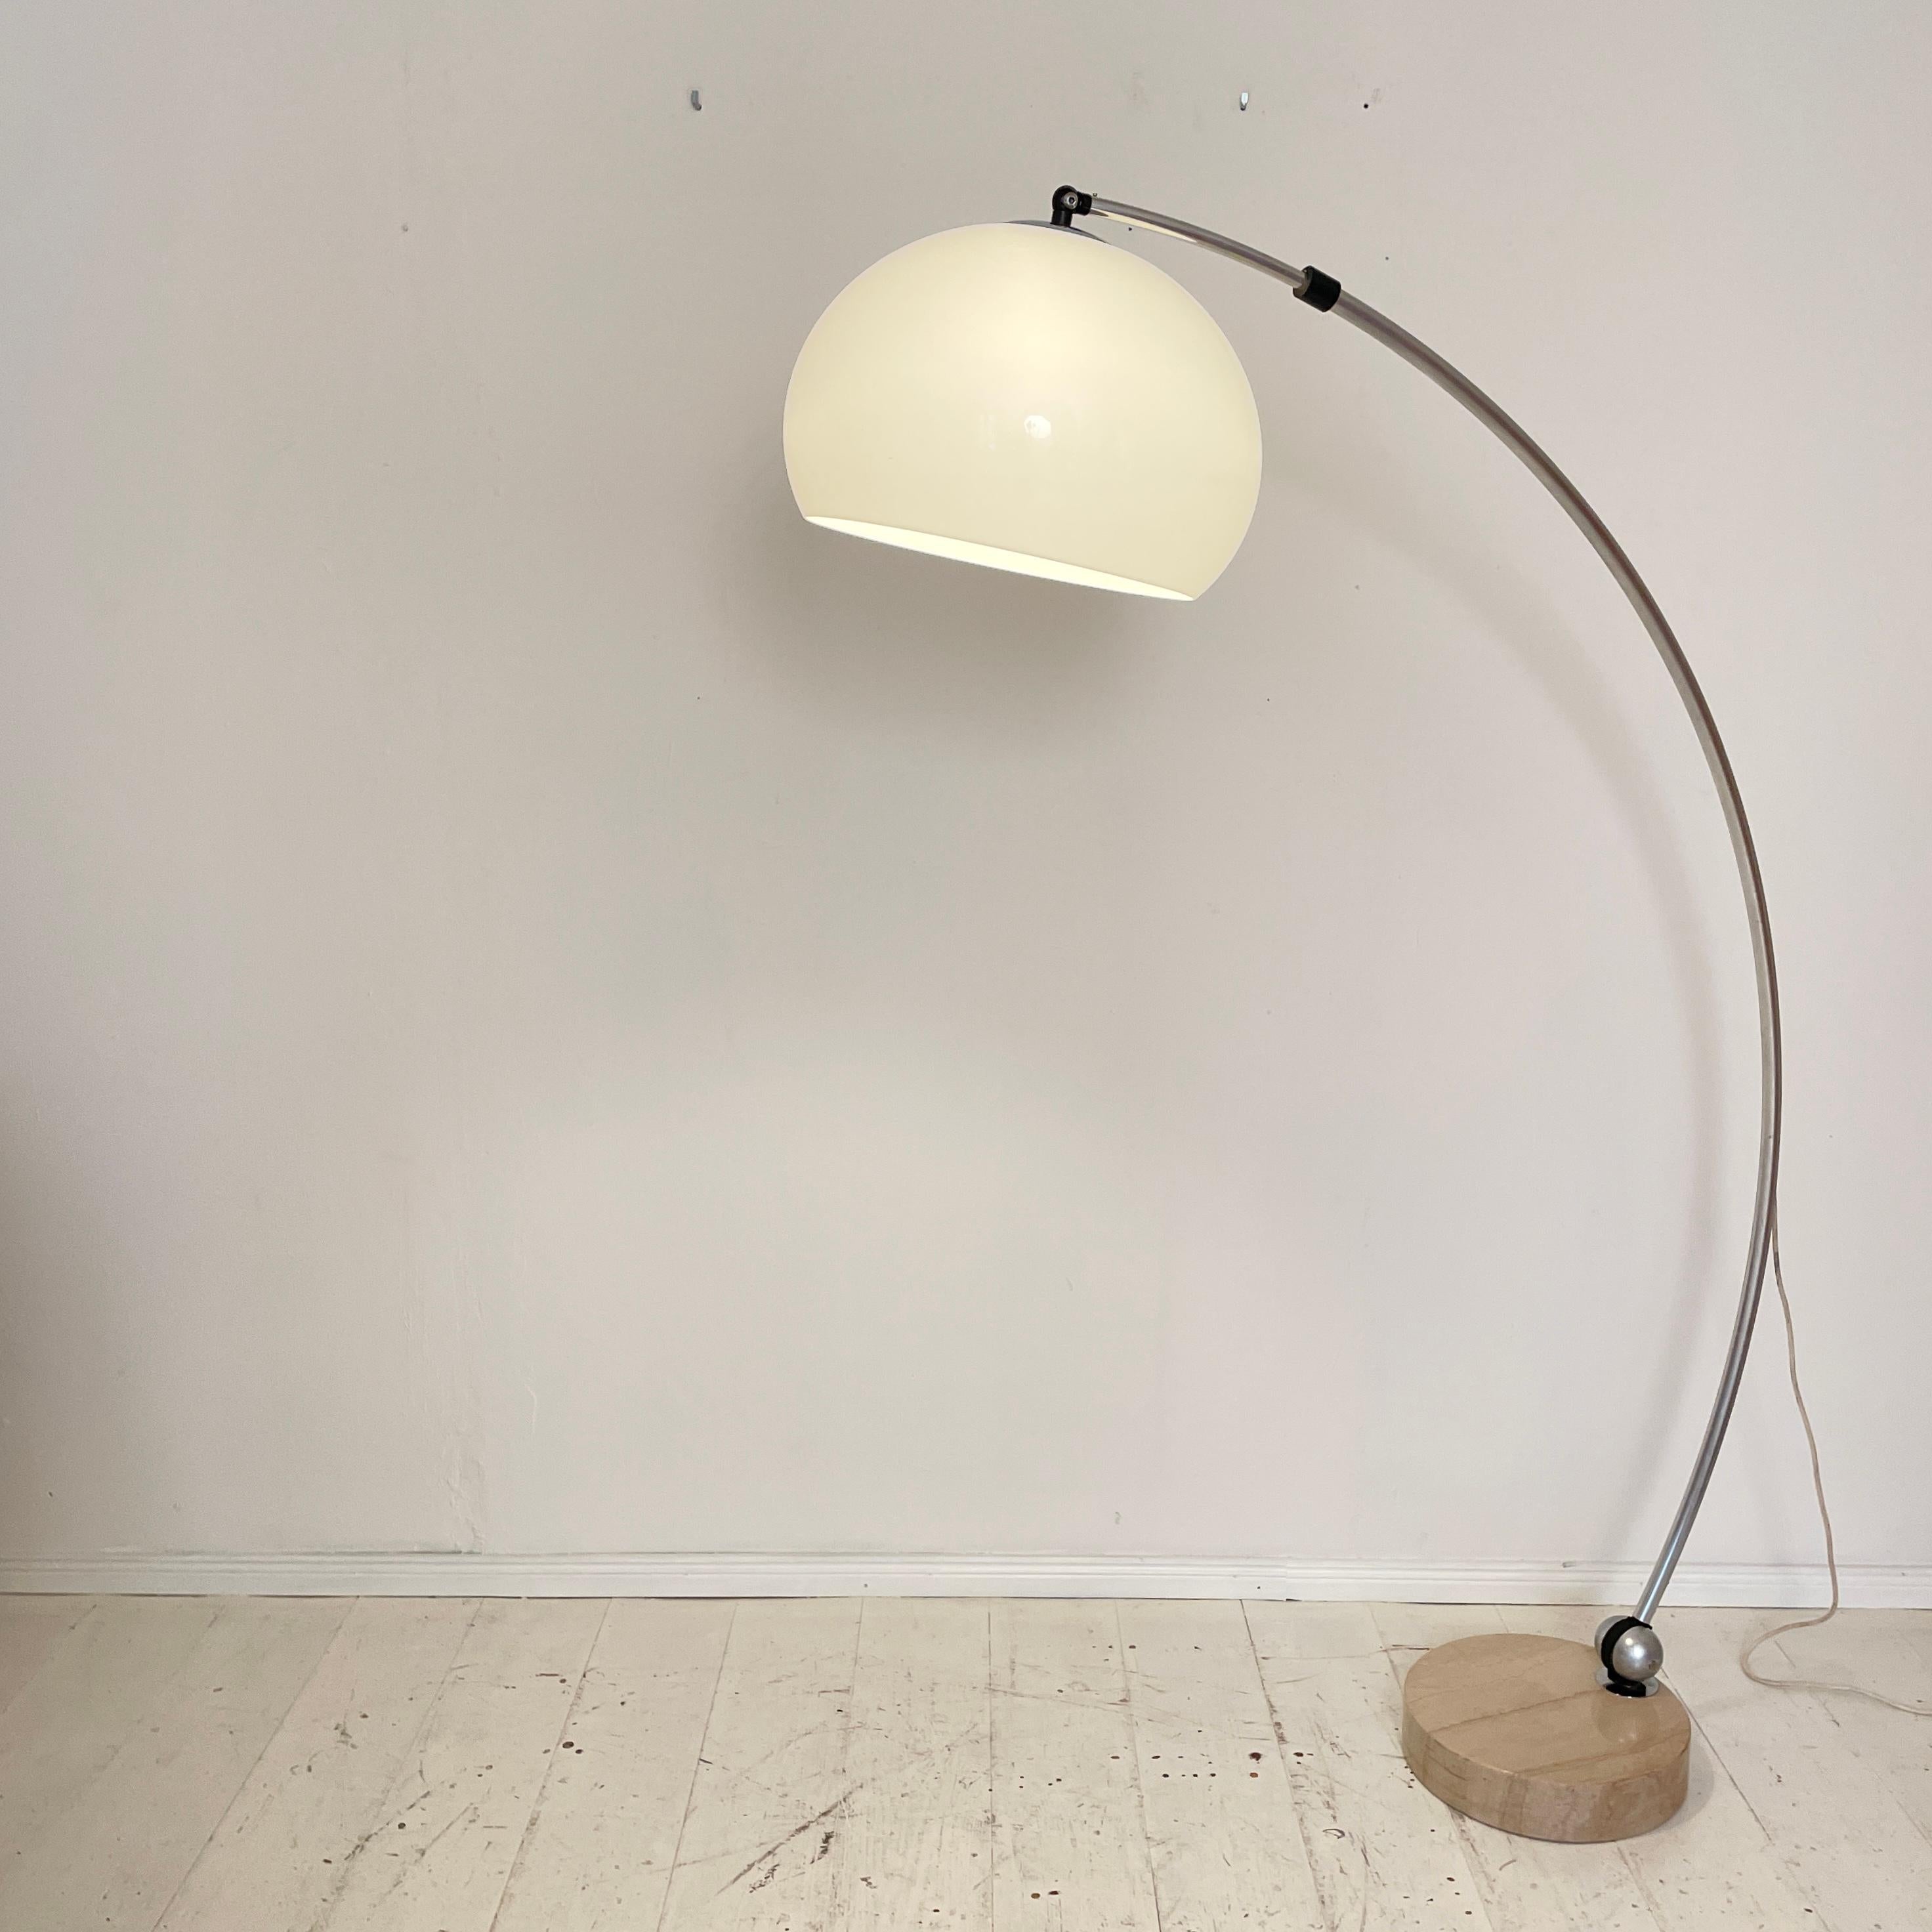 This Italian large arch lamp by Goffredo Reggiani for Guzzini was made in the 1960s. It consisting of a heavy beige travertine stone base with a chrome colored extendable Stand, frosted plastic shade, the arc shaped arm can be rotated on all sides